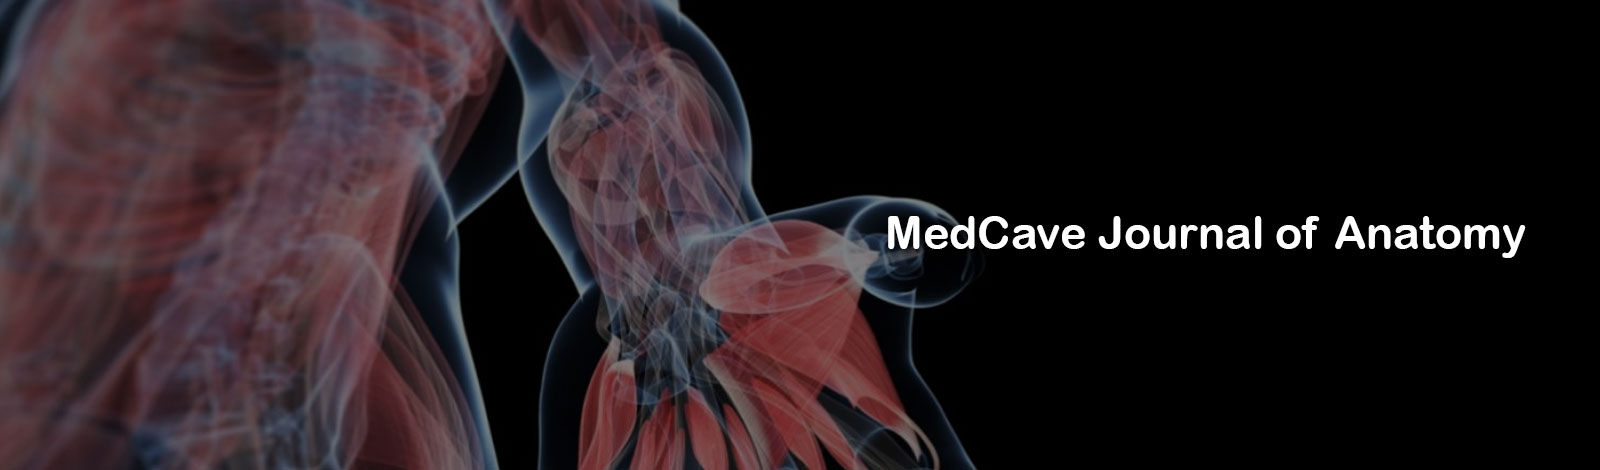 MedCave Journal of Anatomy